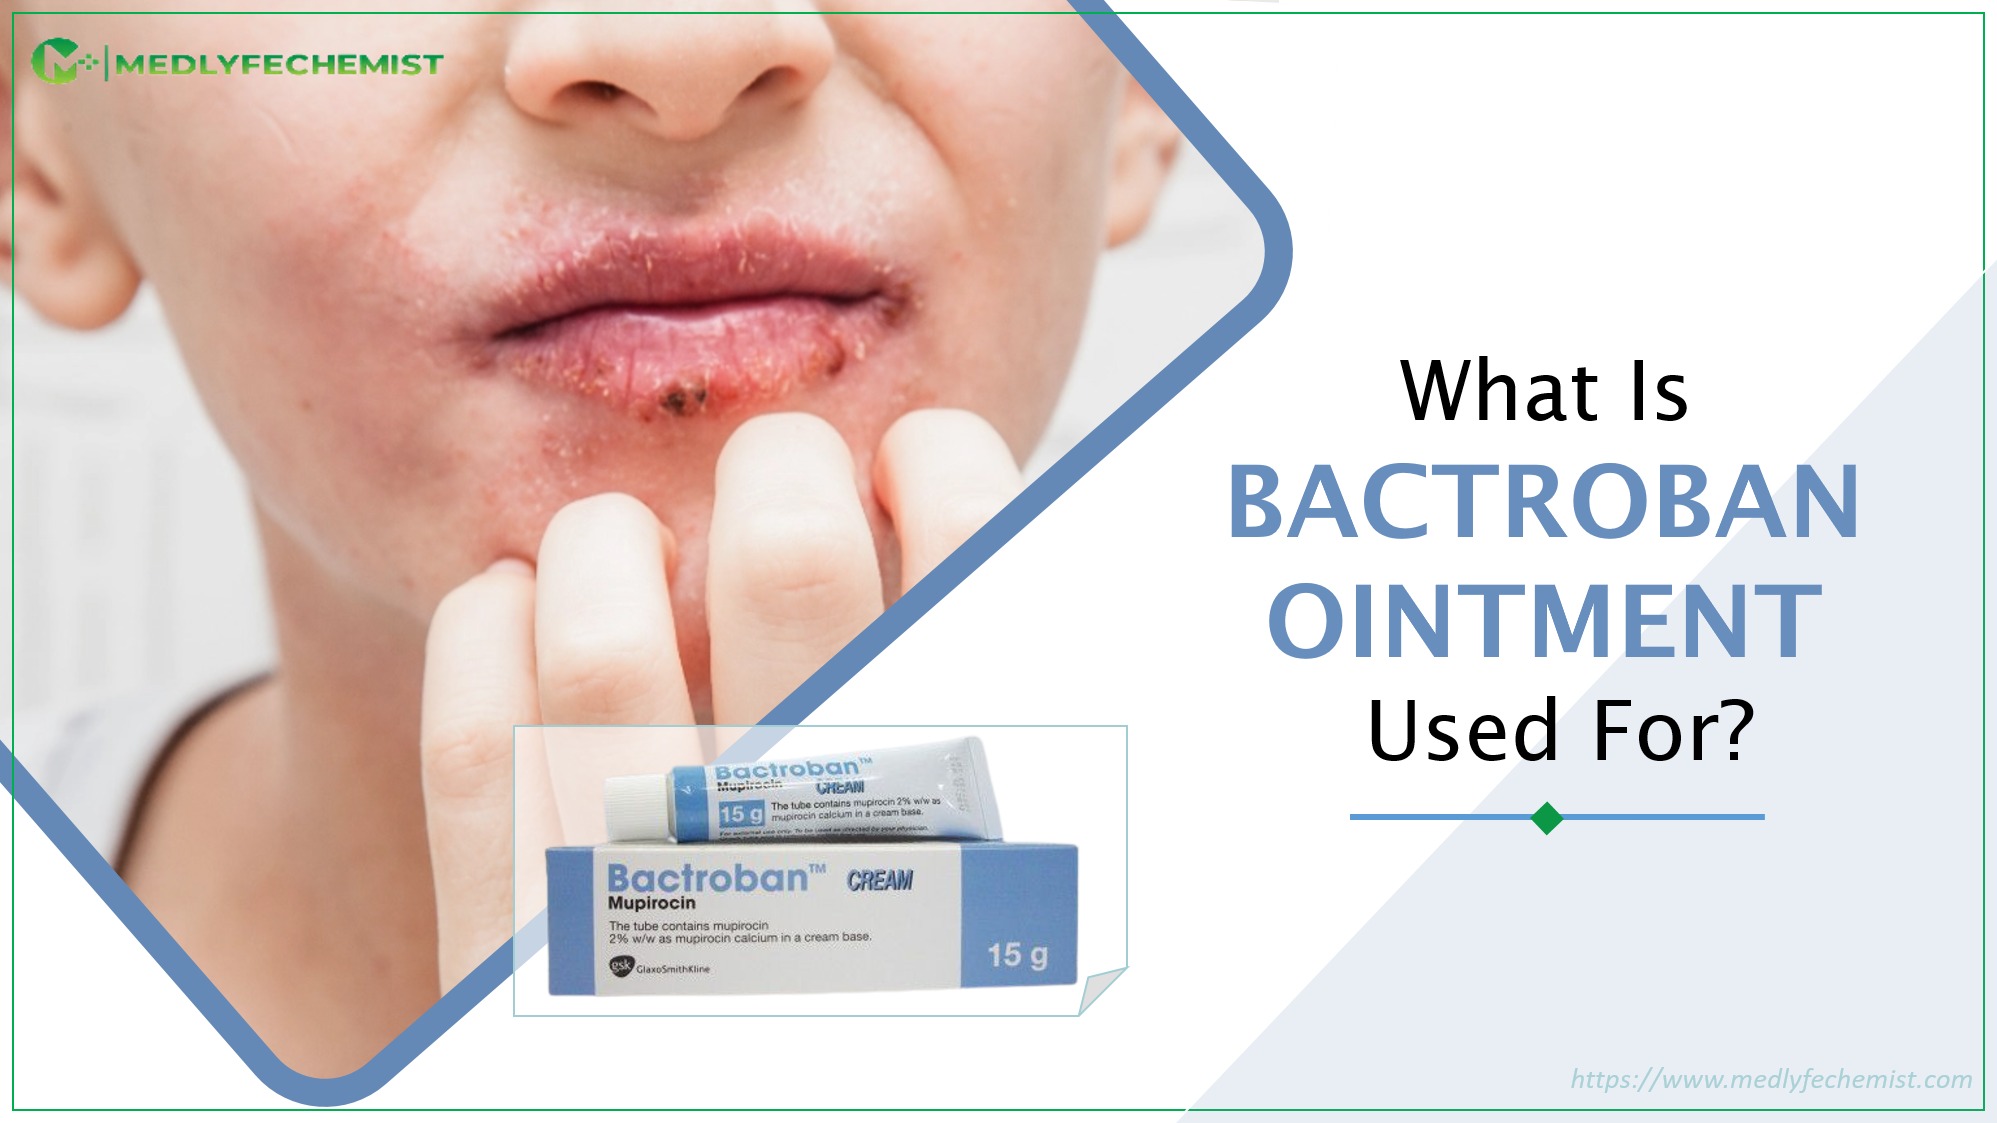 What is Bactroban Ointment used for?